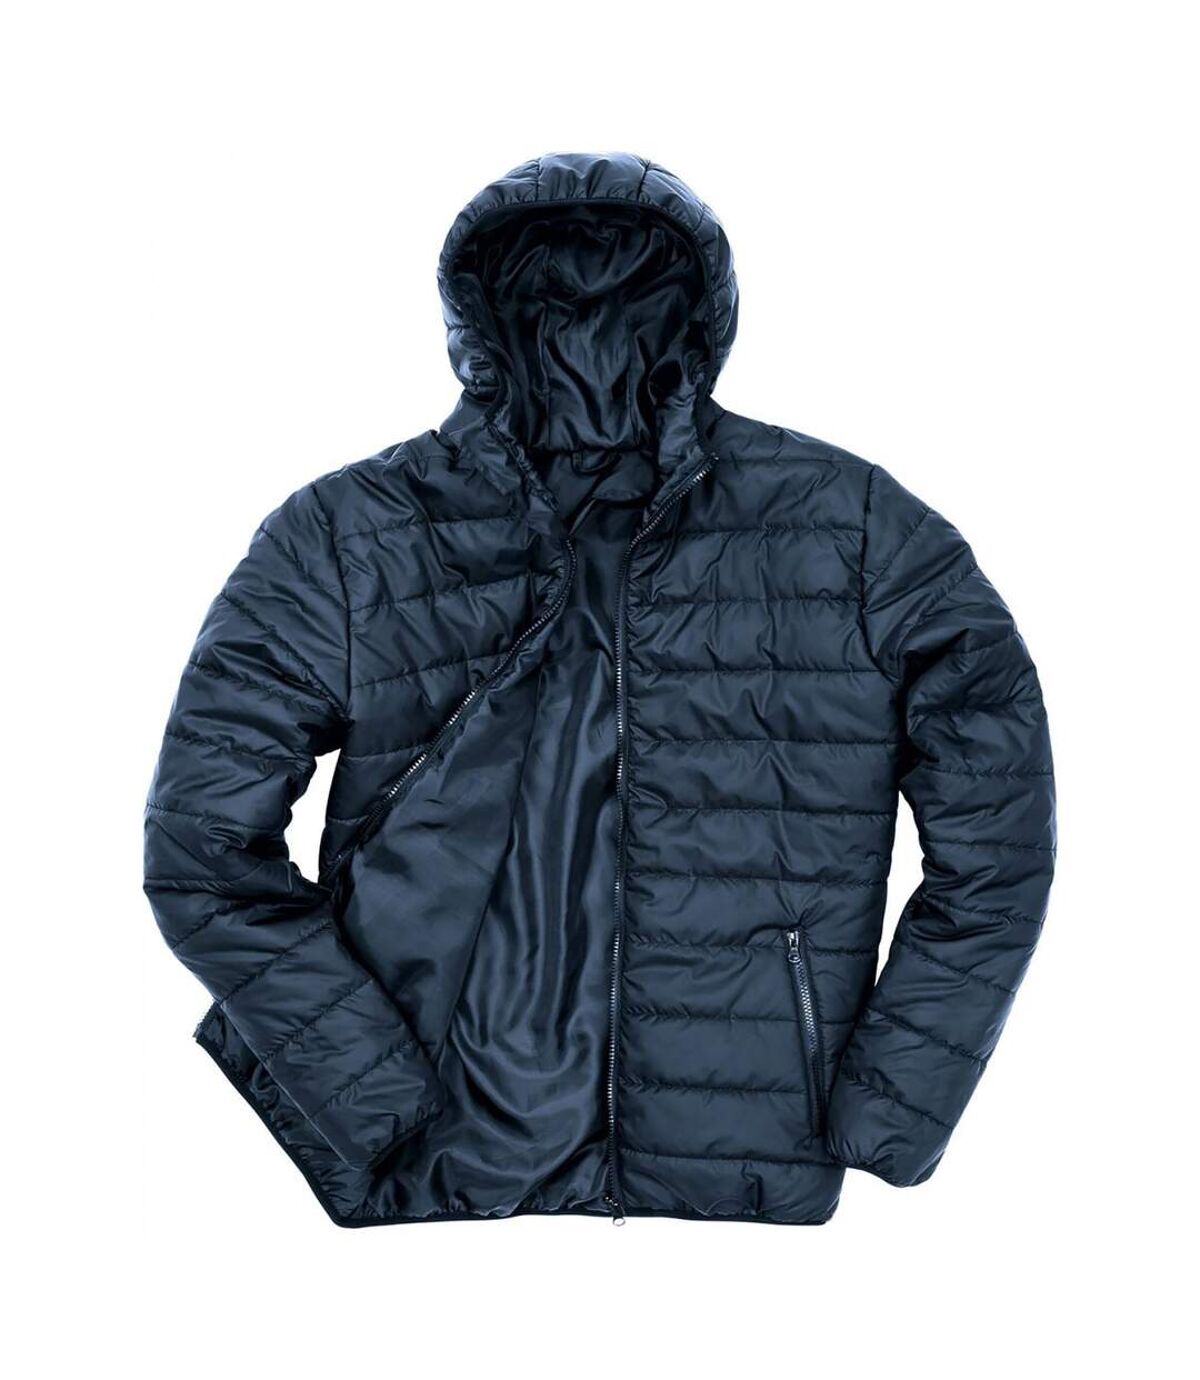 Result Core Mens Soft Padded Jacket (Navy)